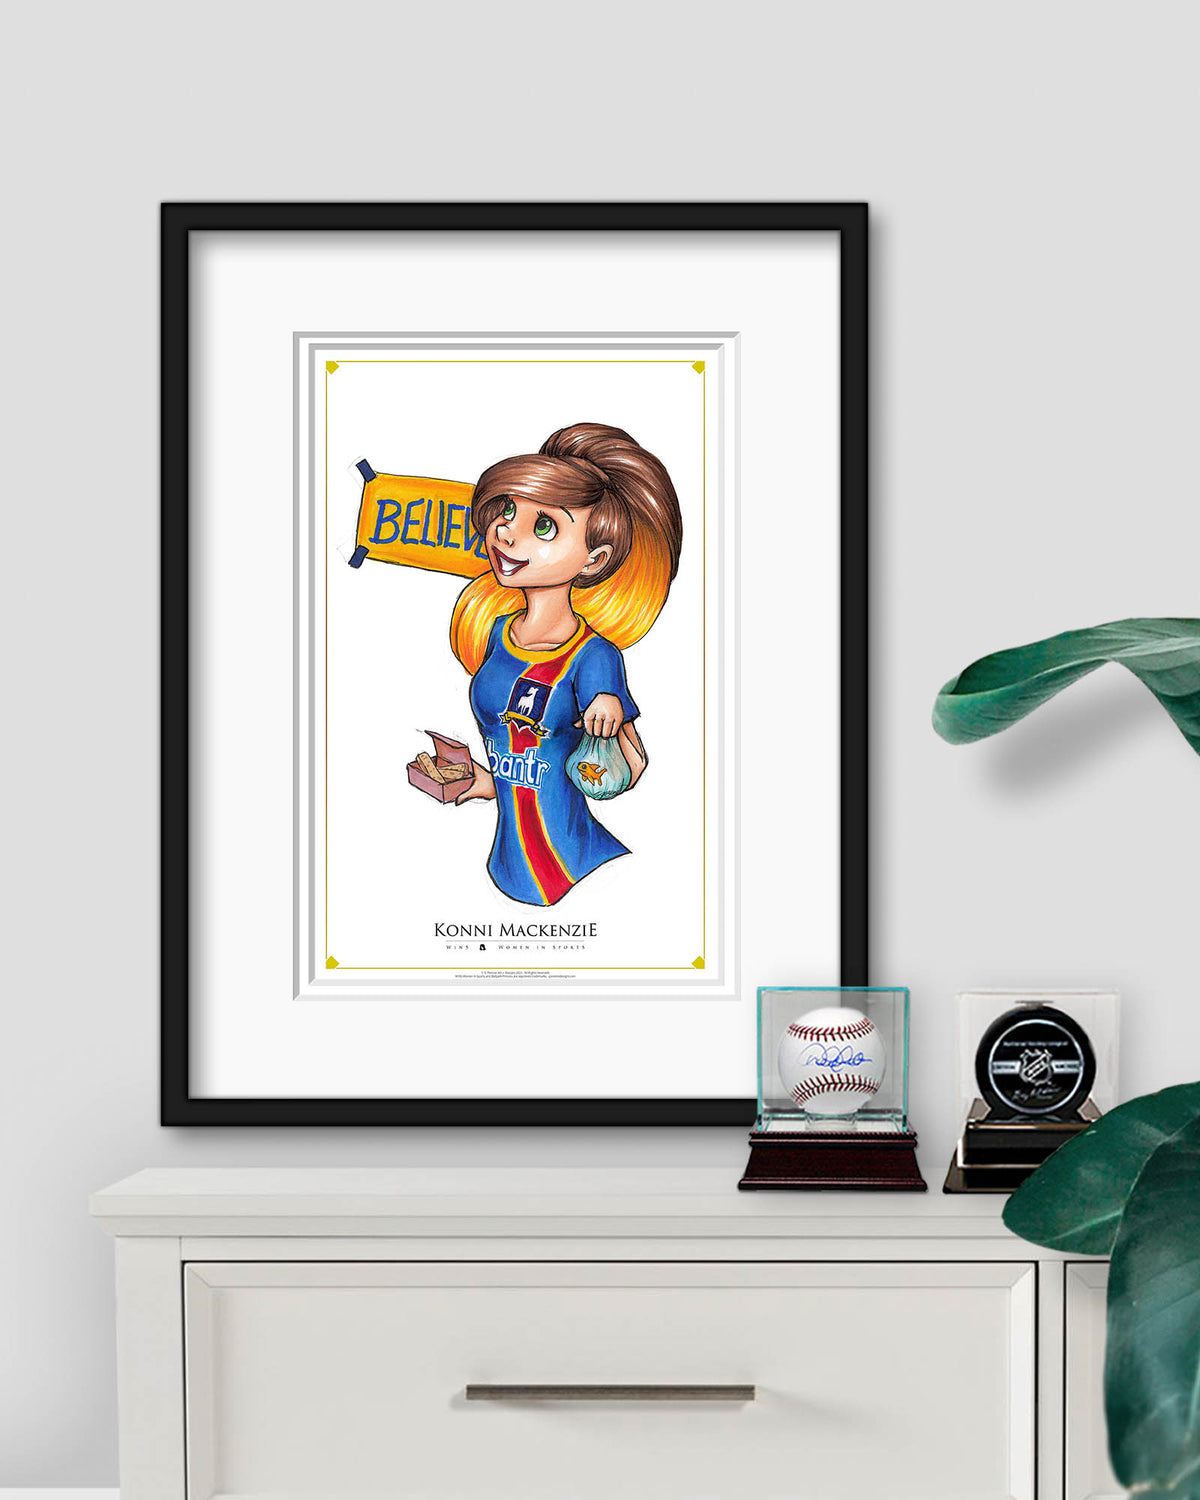 Ted Lasso Believe Sign Poster, All Home Prints